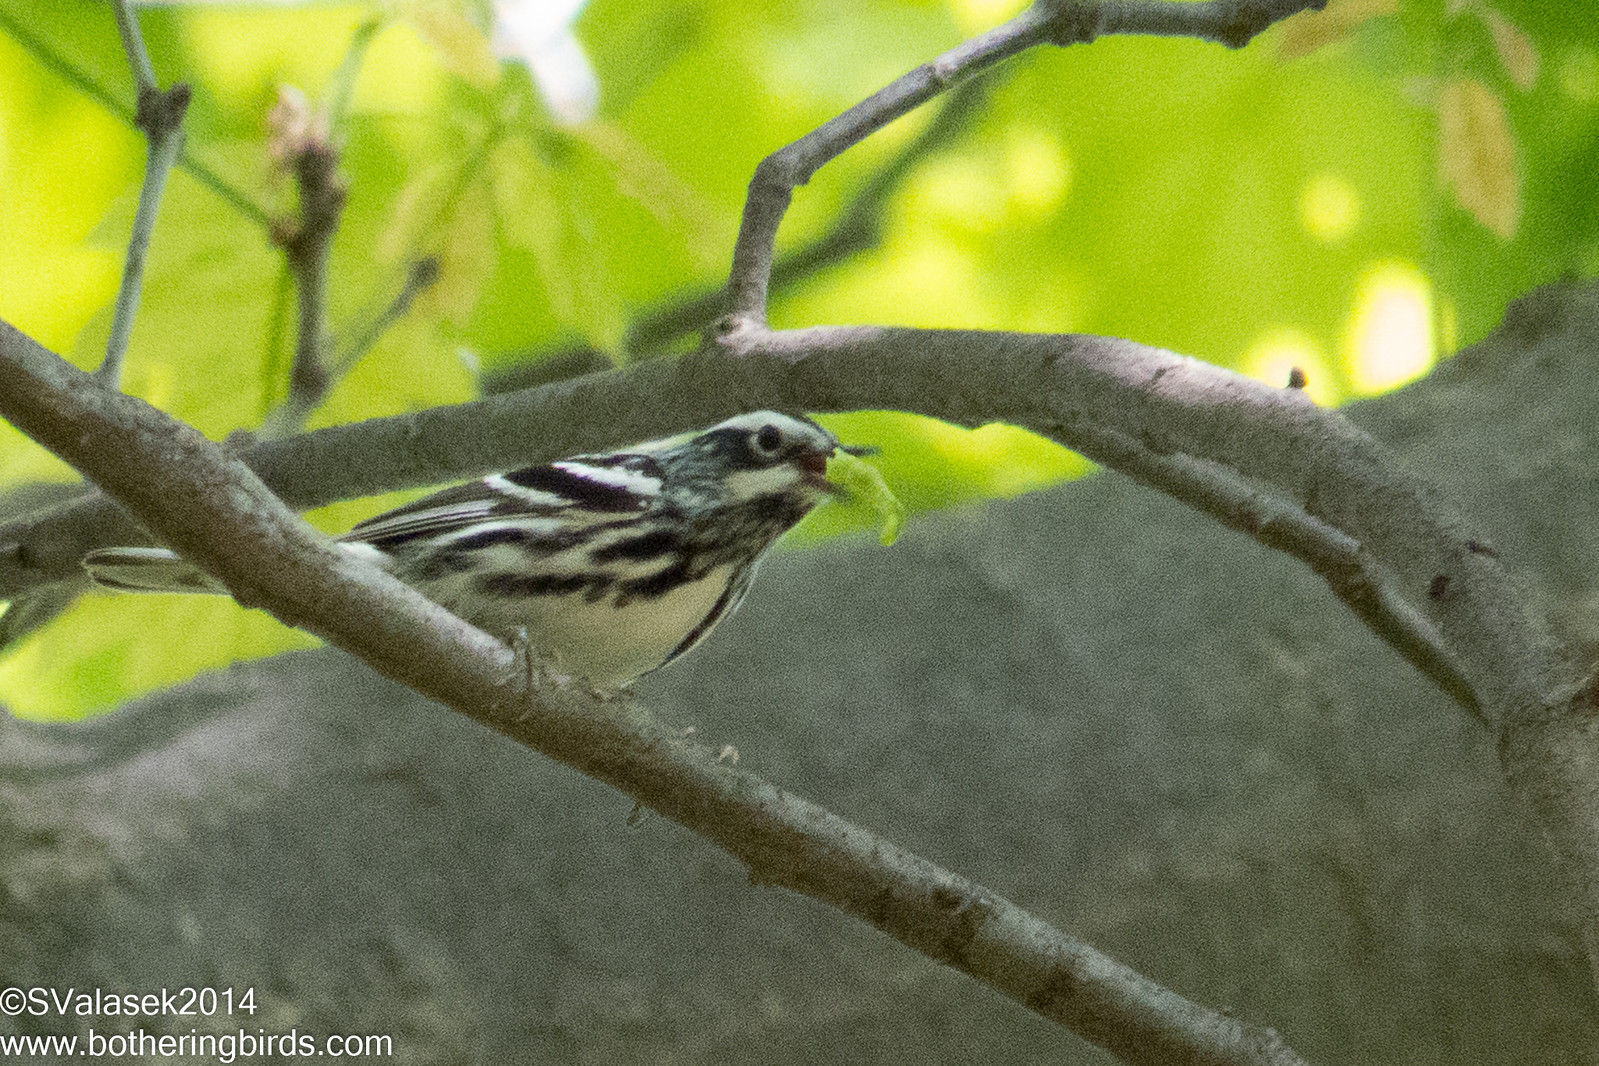 Black-and-White Warbler